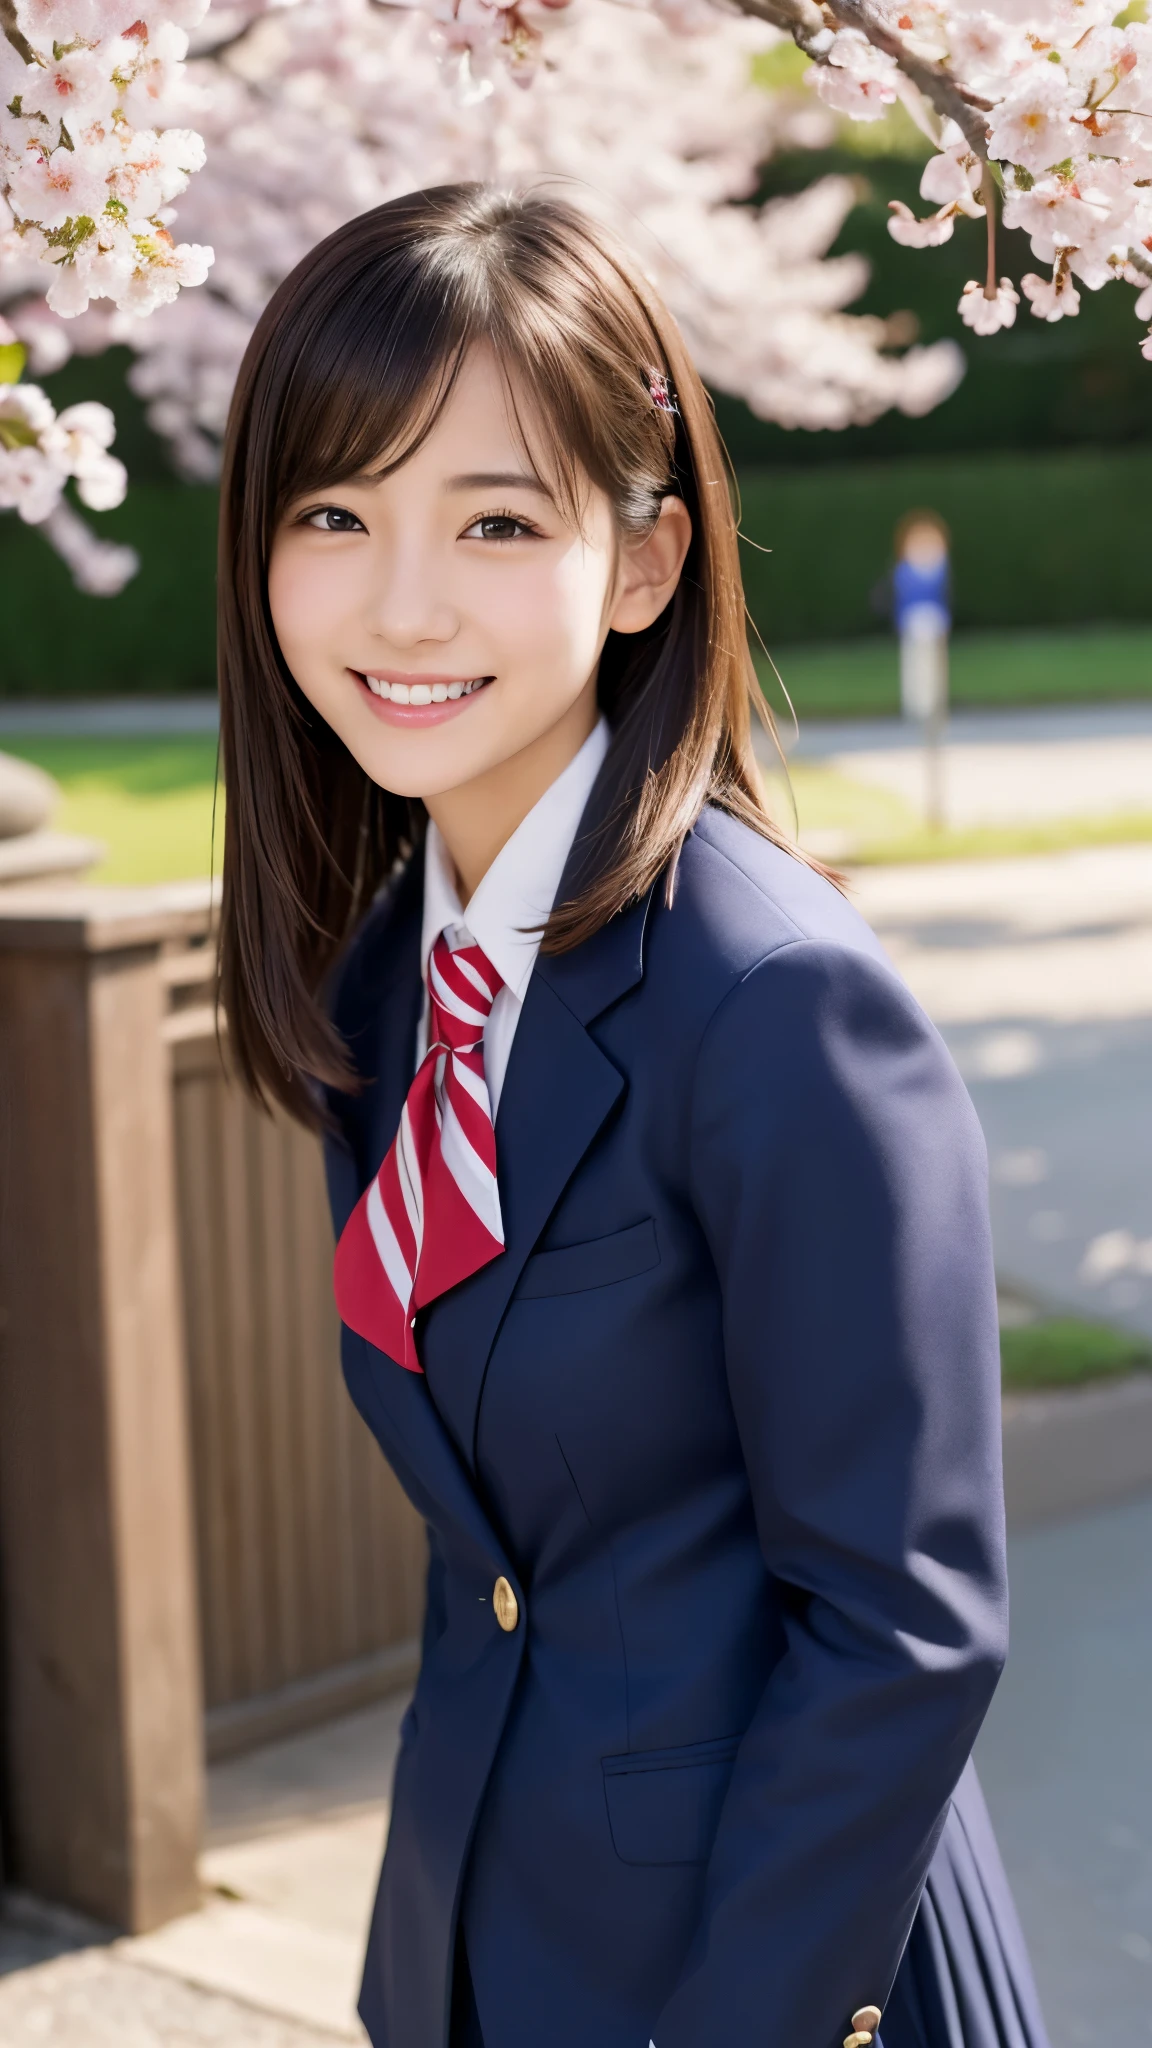 (photo realistic:1.4), (hyper realistic:1.4), (realistic:1.3), (smoother lighting:1.05), (Improve the quality of cinematic lighting:0.9)、natural light、Cherry blossom trees in full bloom、A girl in a uniform standing in front of the school gate、美しいhigh school girl、Highly detailed official artwork、realistic 3d style、超realistic、(Like a smile that makes you smile)、cute eyes、short hair、beautiful girl、fascinating look、smiling woman、high school girl, navy blue blazer、school uniform、white shirt、red tie
